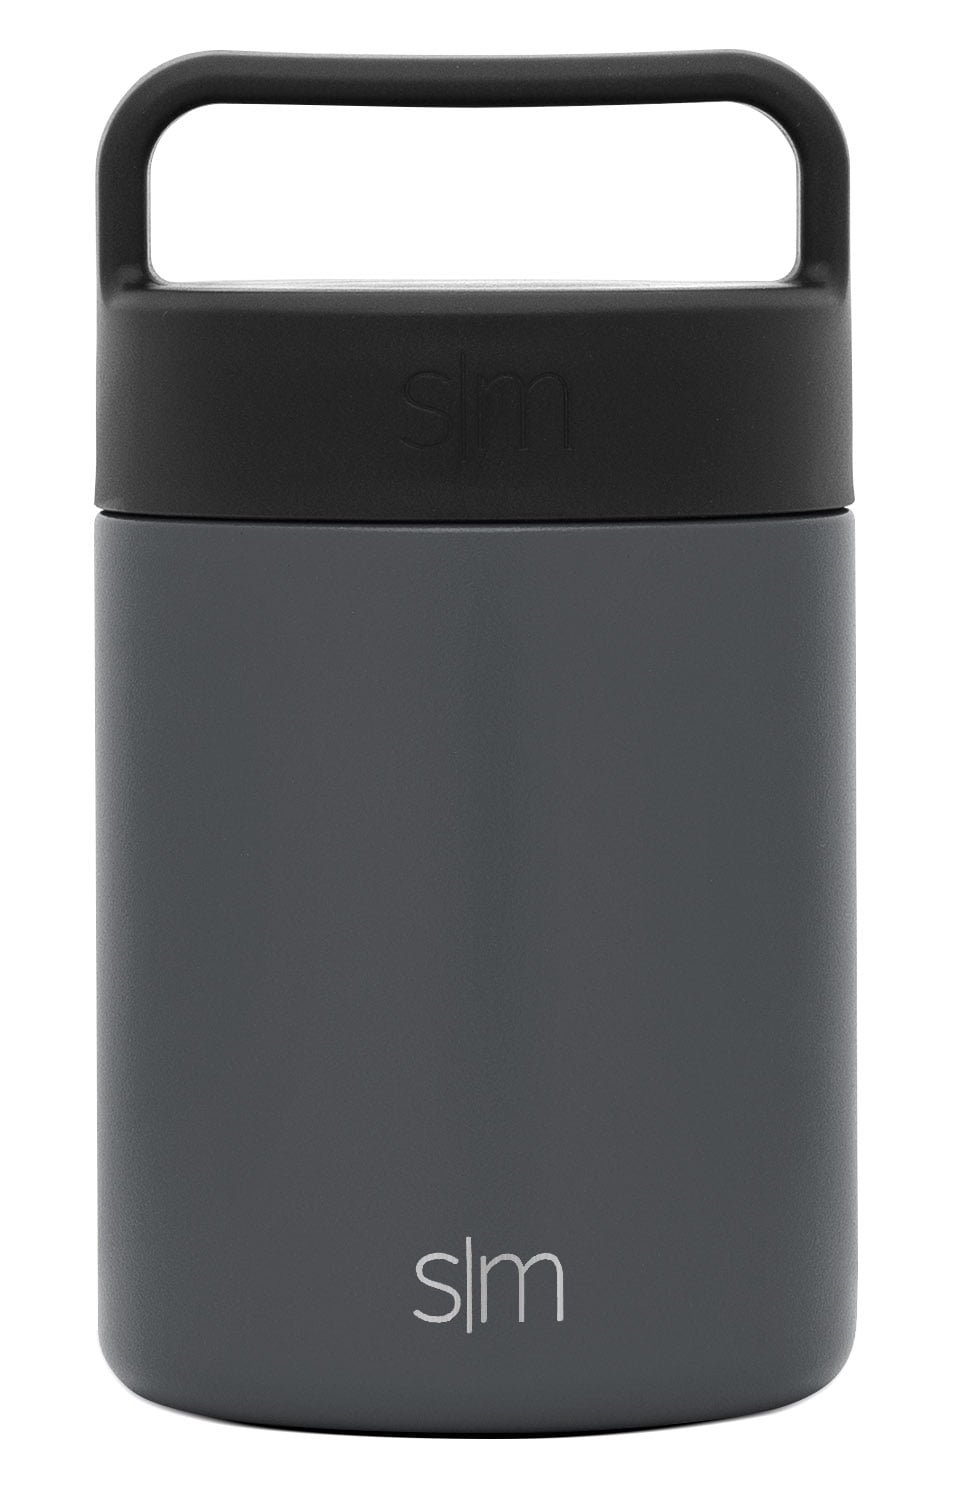 $4/mo - Finance Simple Modern Food Jar Thermos for Hot Food